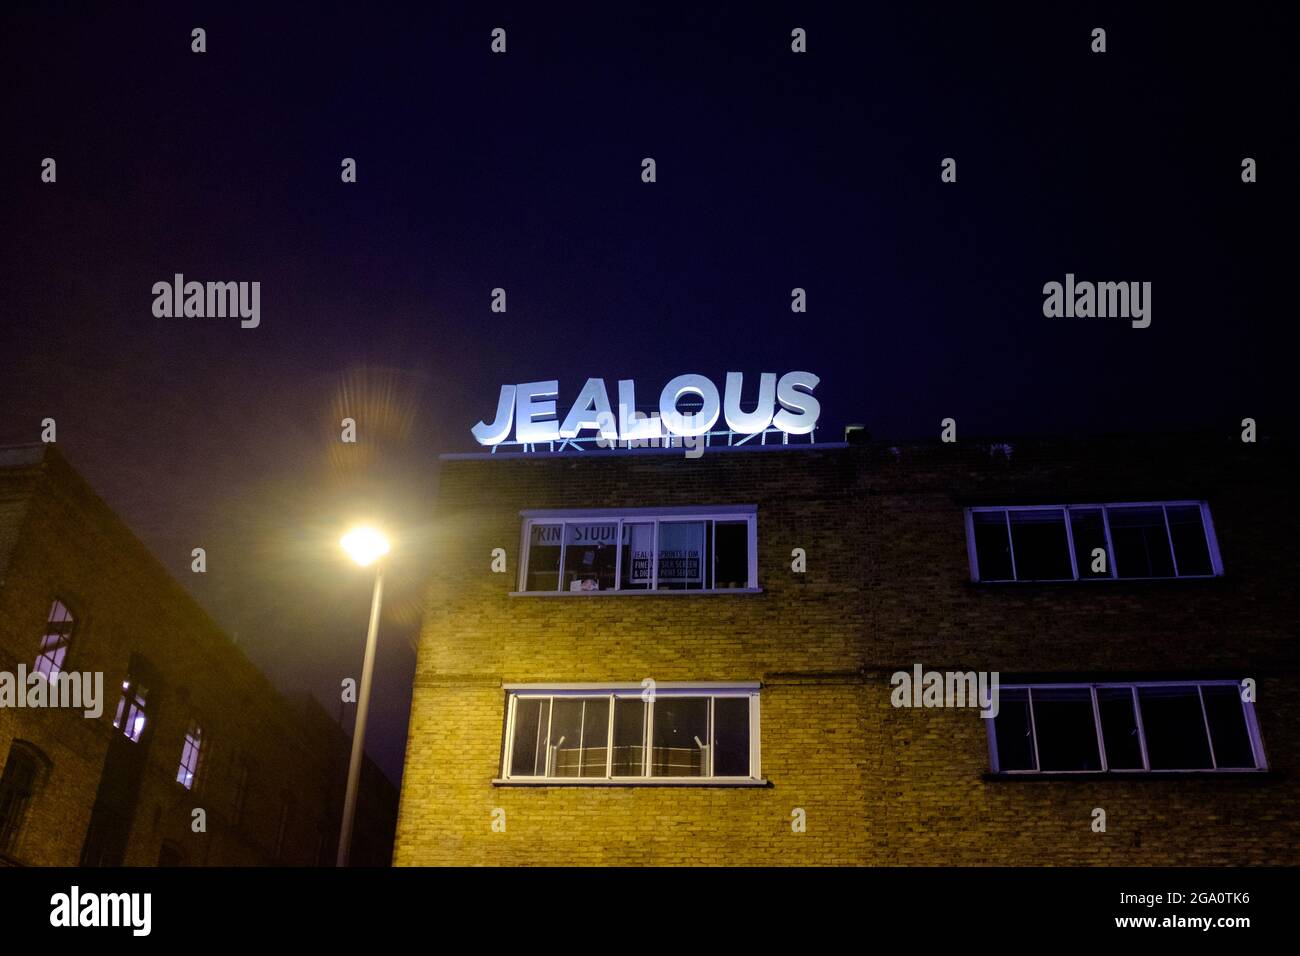 Jealous text shop sign lettering on top of a London building late at night Stock Photo